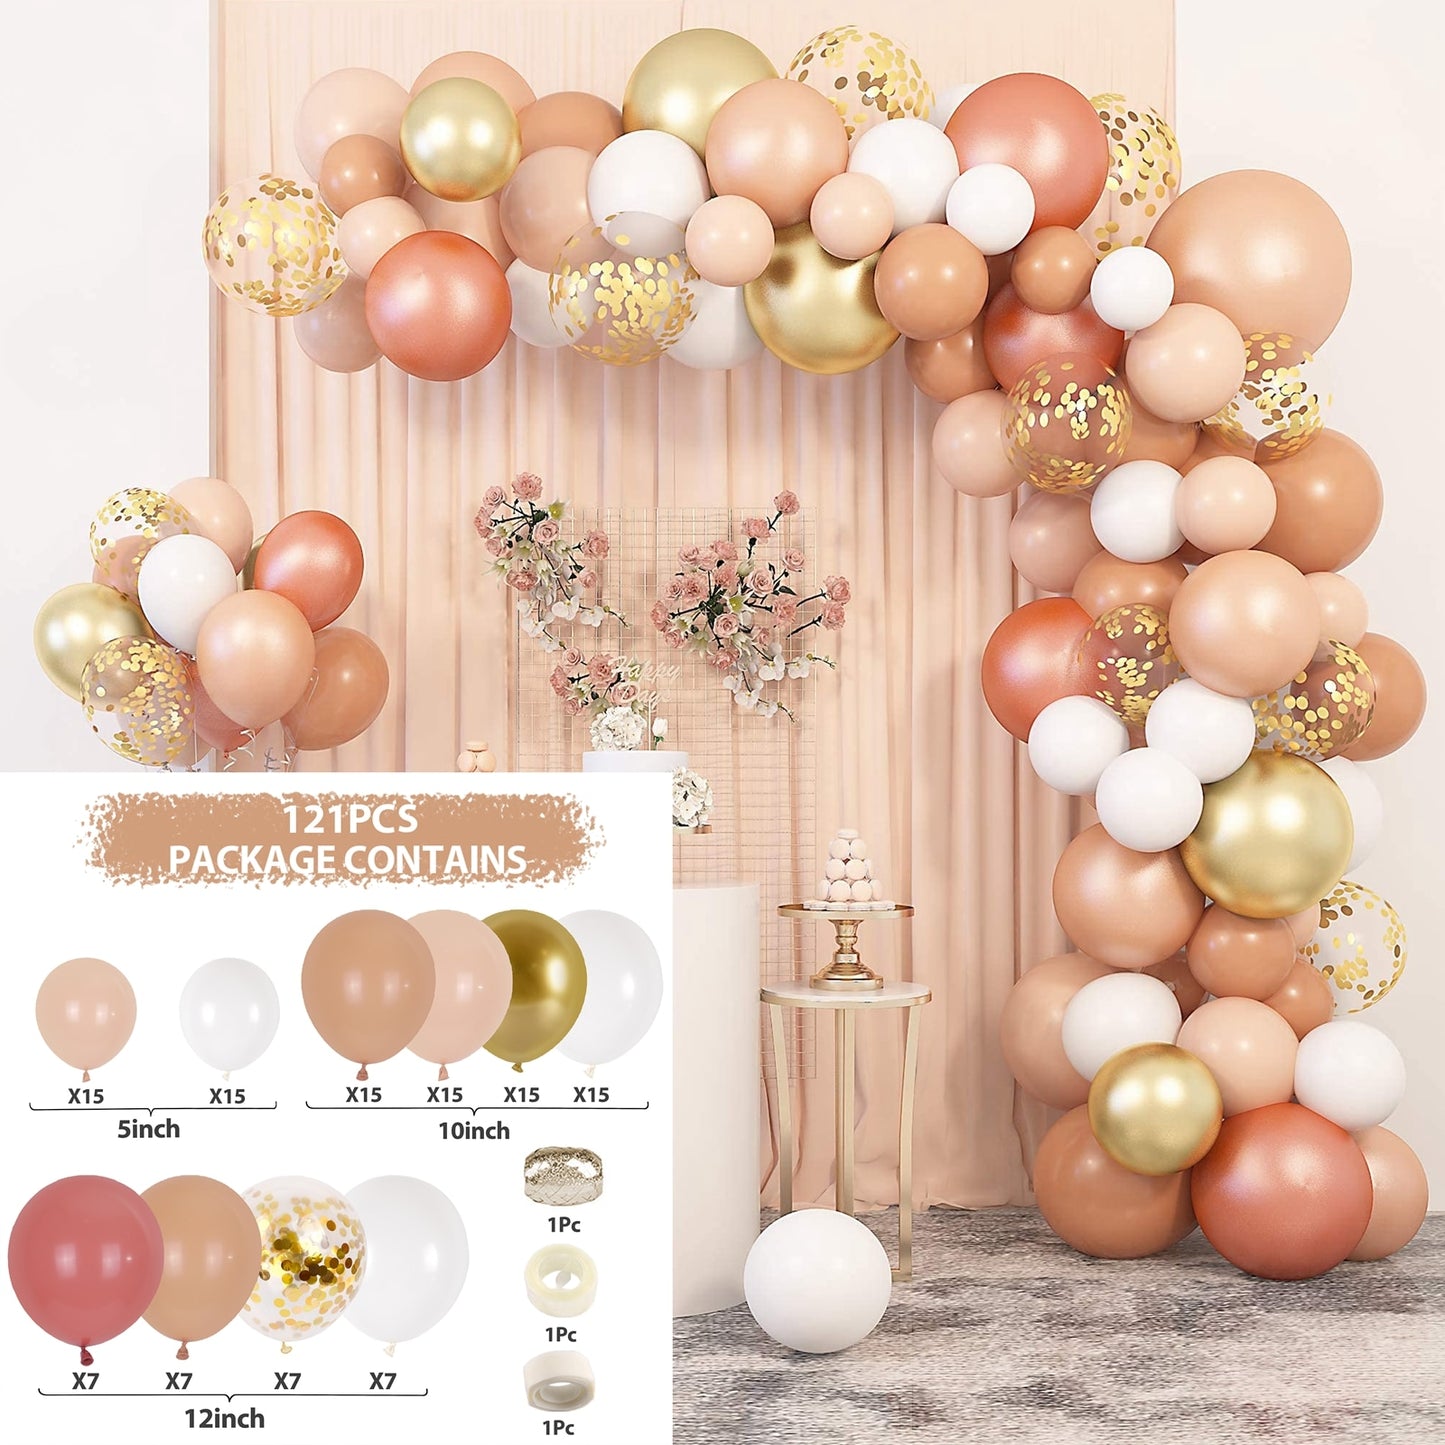 Pink Balloon Garland Arch Kit Birthday Party Decorations Kids Birthday Foil White Gold Balloon Wedding Decor Baby Shower Globos Balloons Set for Birthday Parties DailyAlertDeals 34 AS SHOWN 